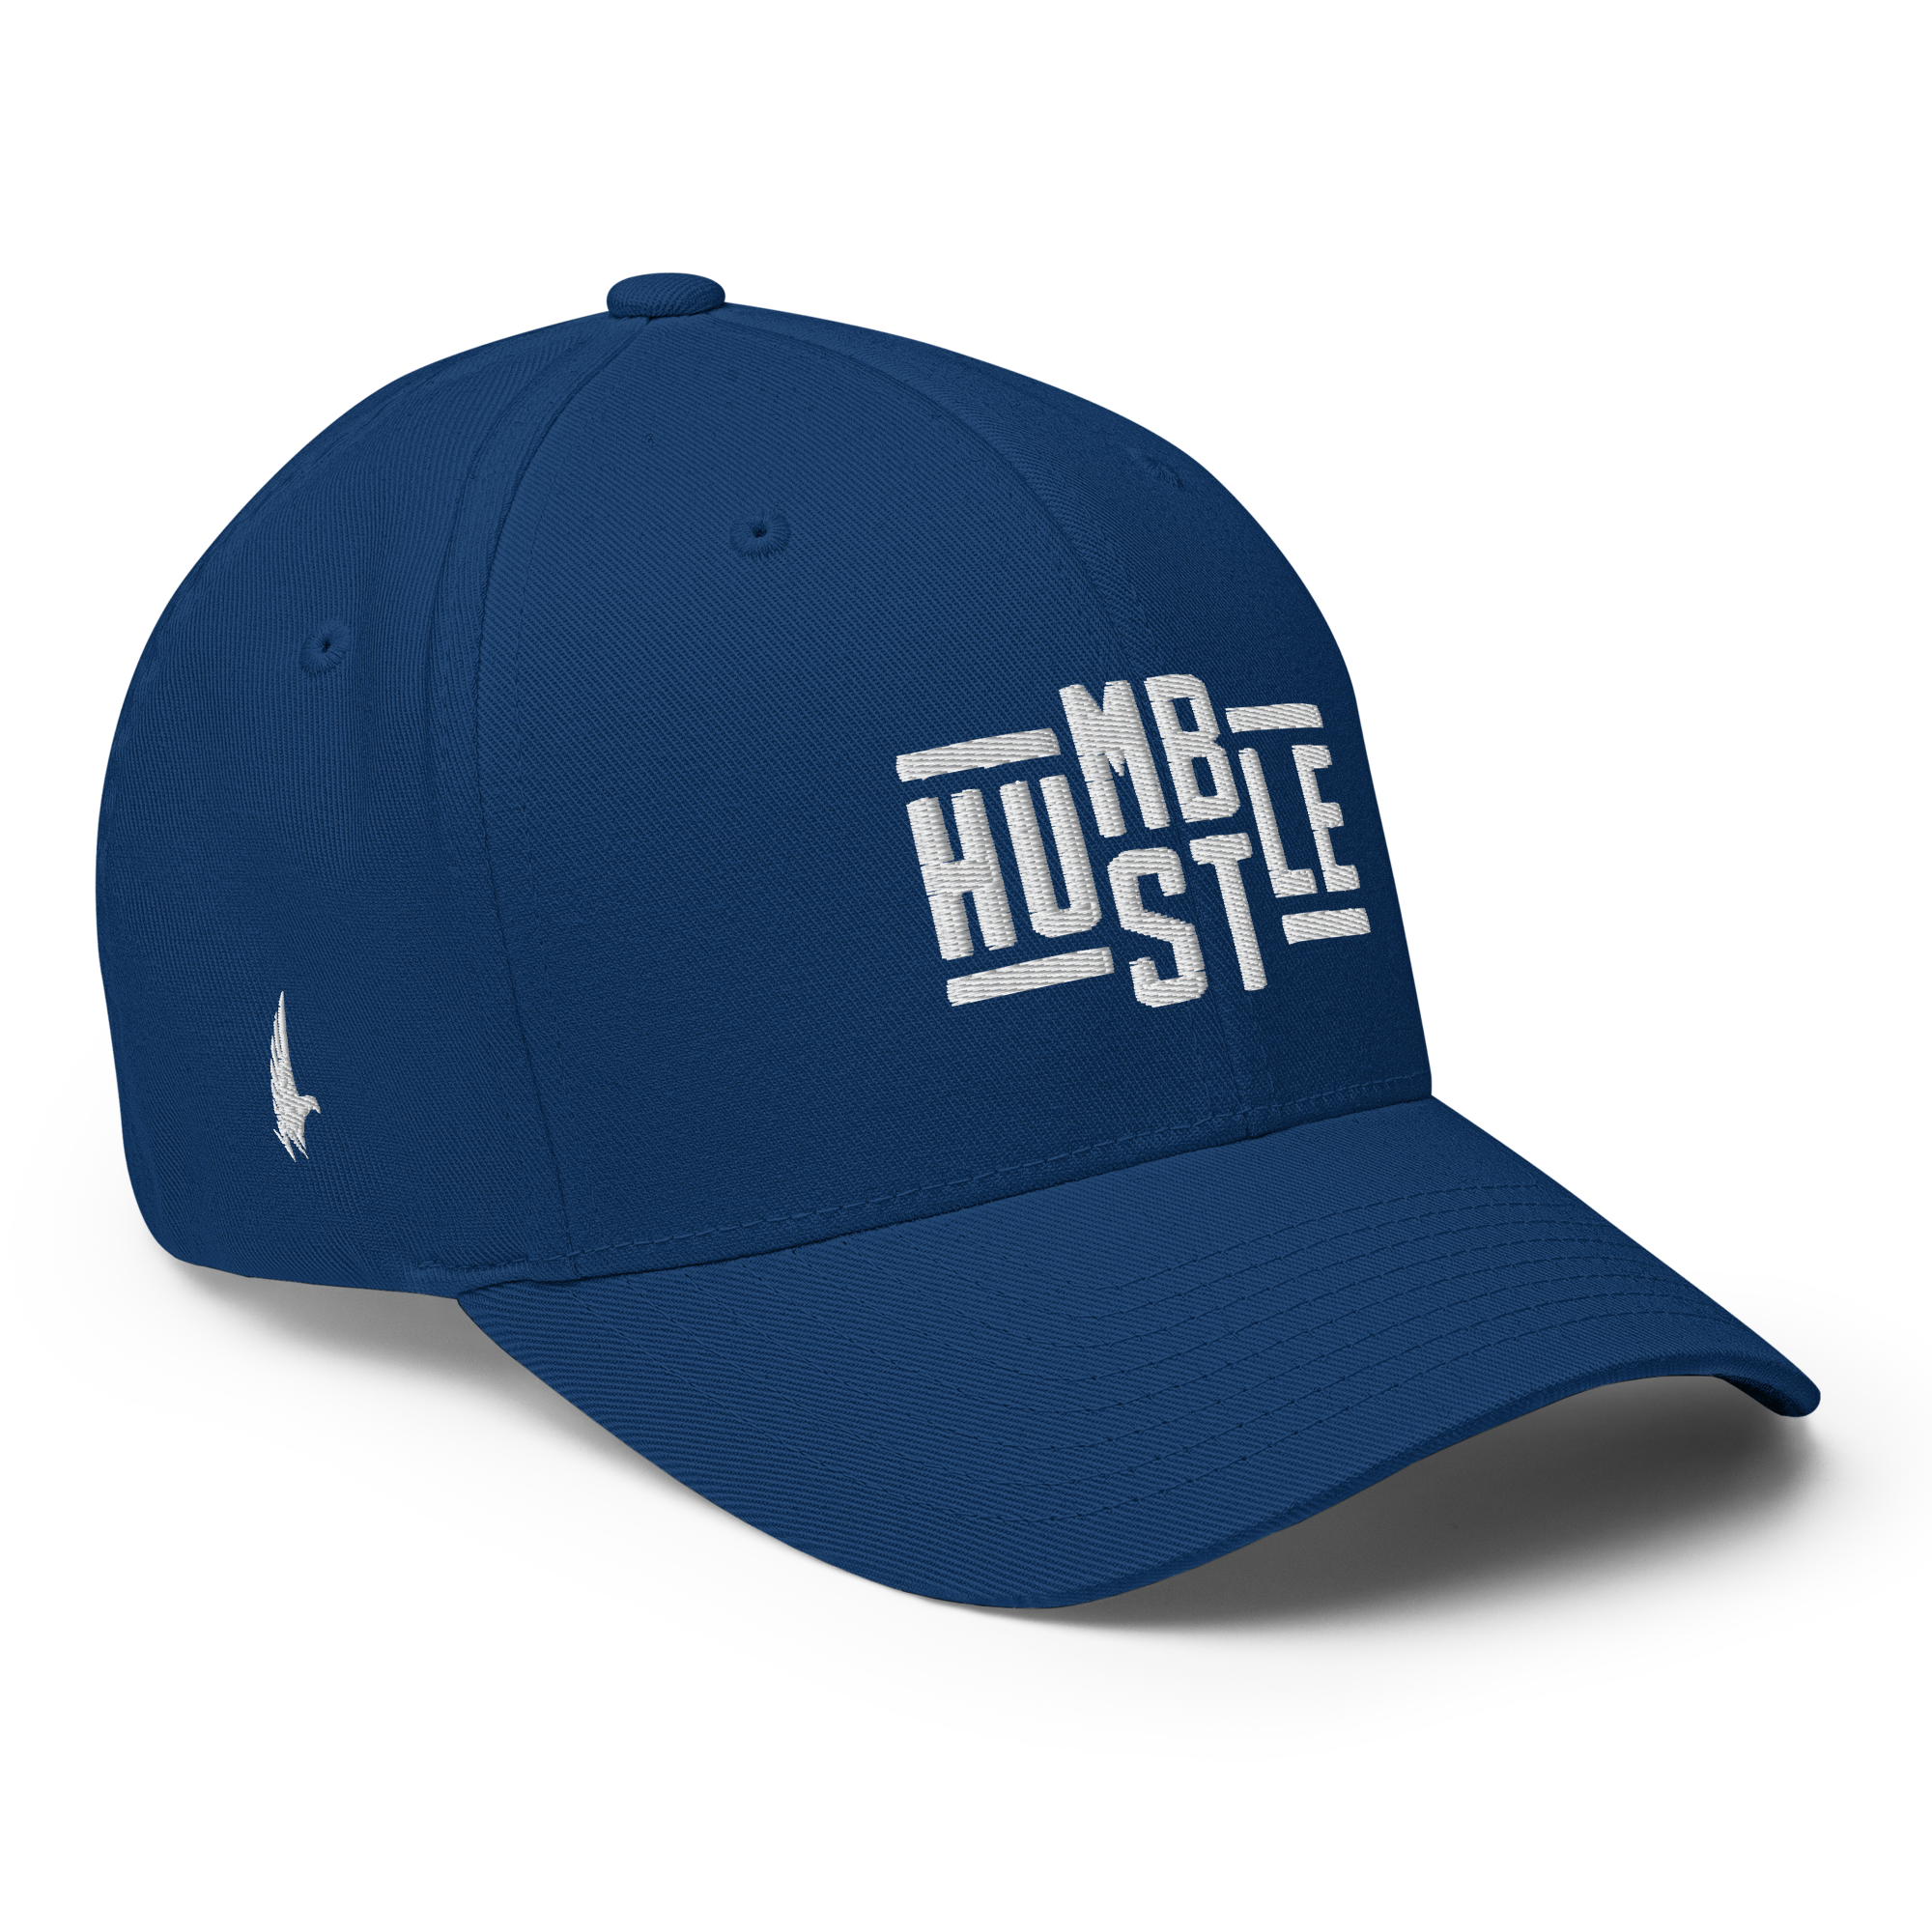 Loyalty Vibes Hustle Fitted Hat - Blue / White Fitted - Loyalty Vibes